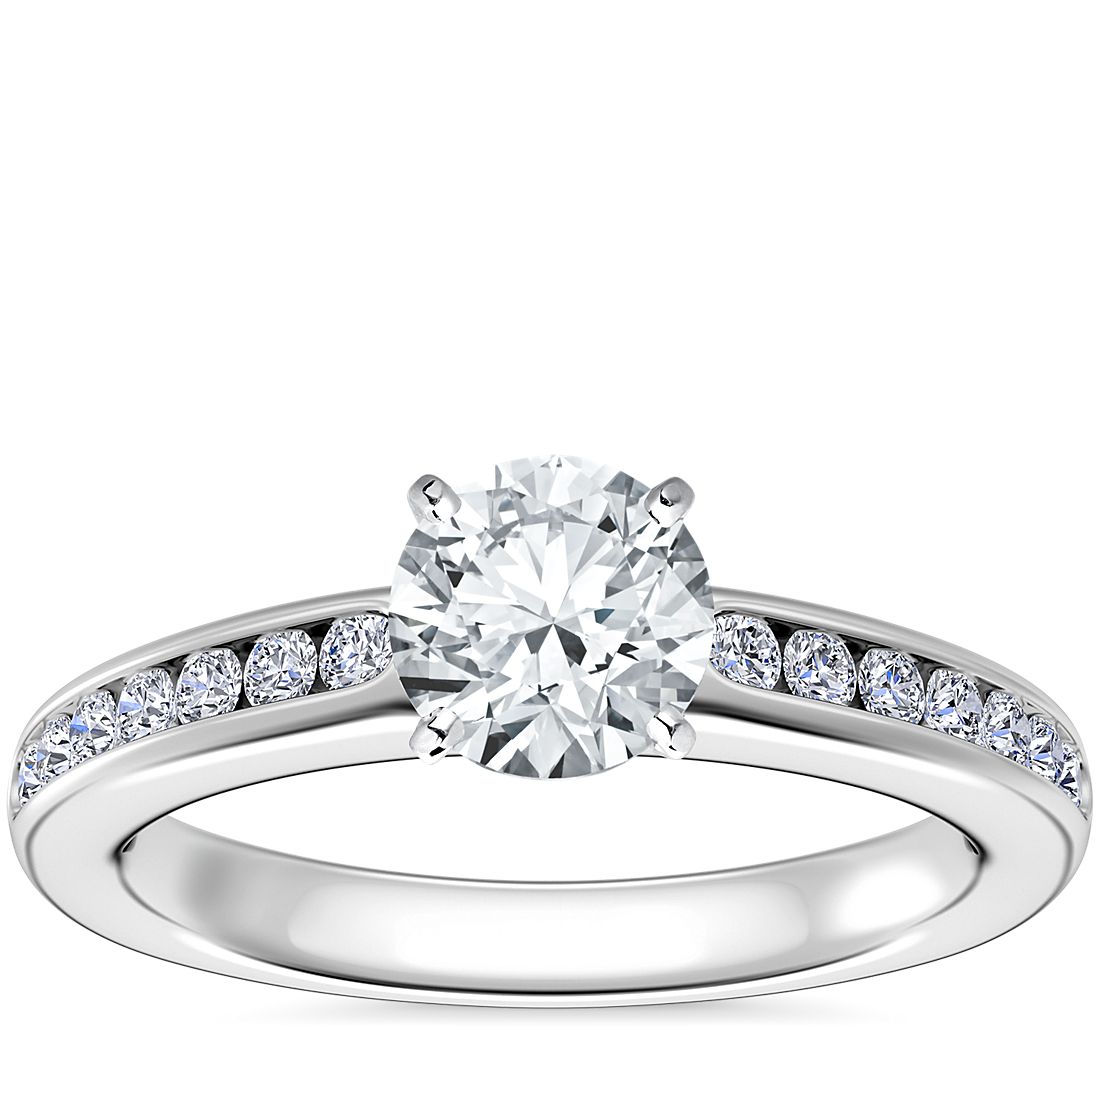 Channel Set Round Diamond Engagement Ring in 14k White (1/4 ct. tw.) | Nile